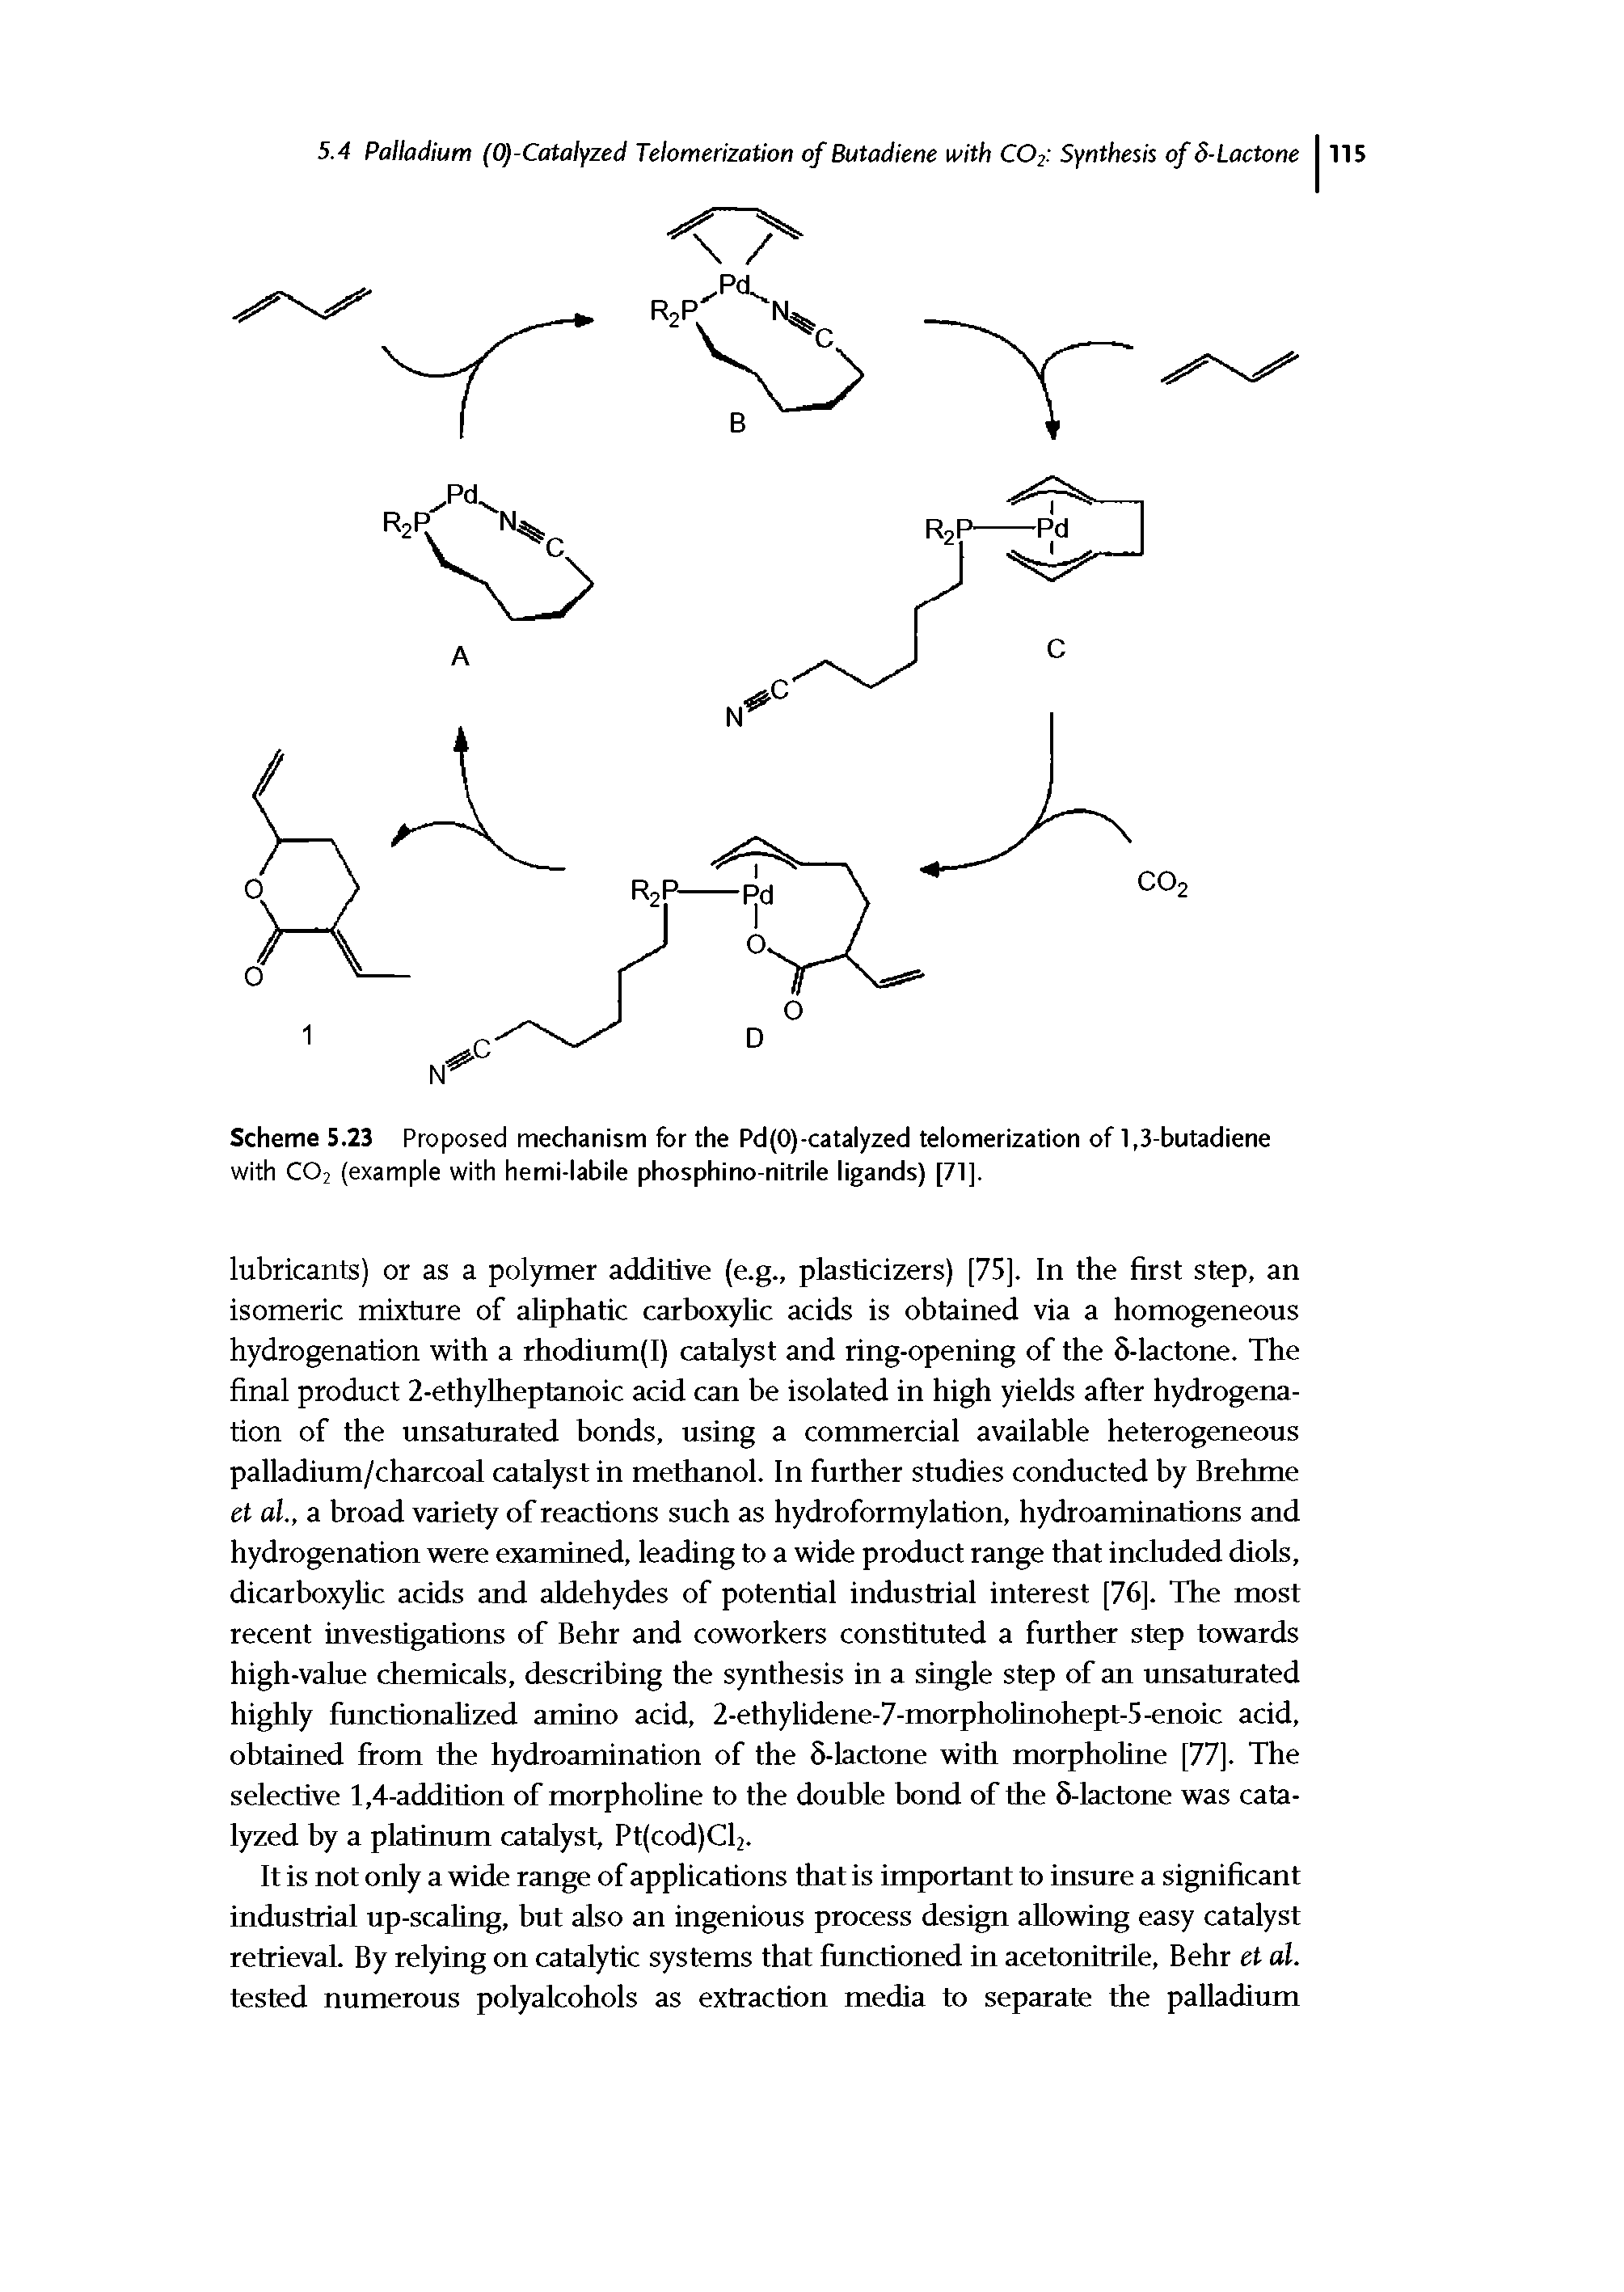 Scheme 5.23 Proposed mechanism for the Pd(0)-catalyzed telomerization of 1,3-butadiene with C02 (example with hemi-labile phosphino-nitrile ligands) [71].